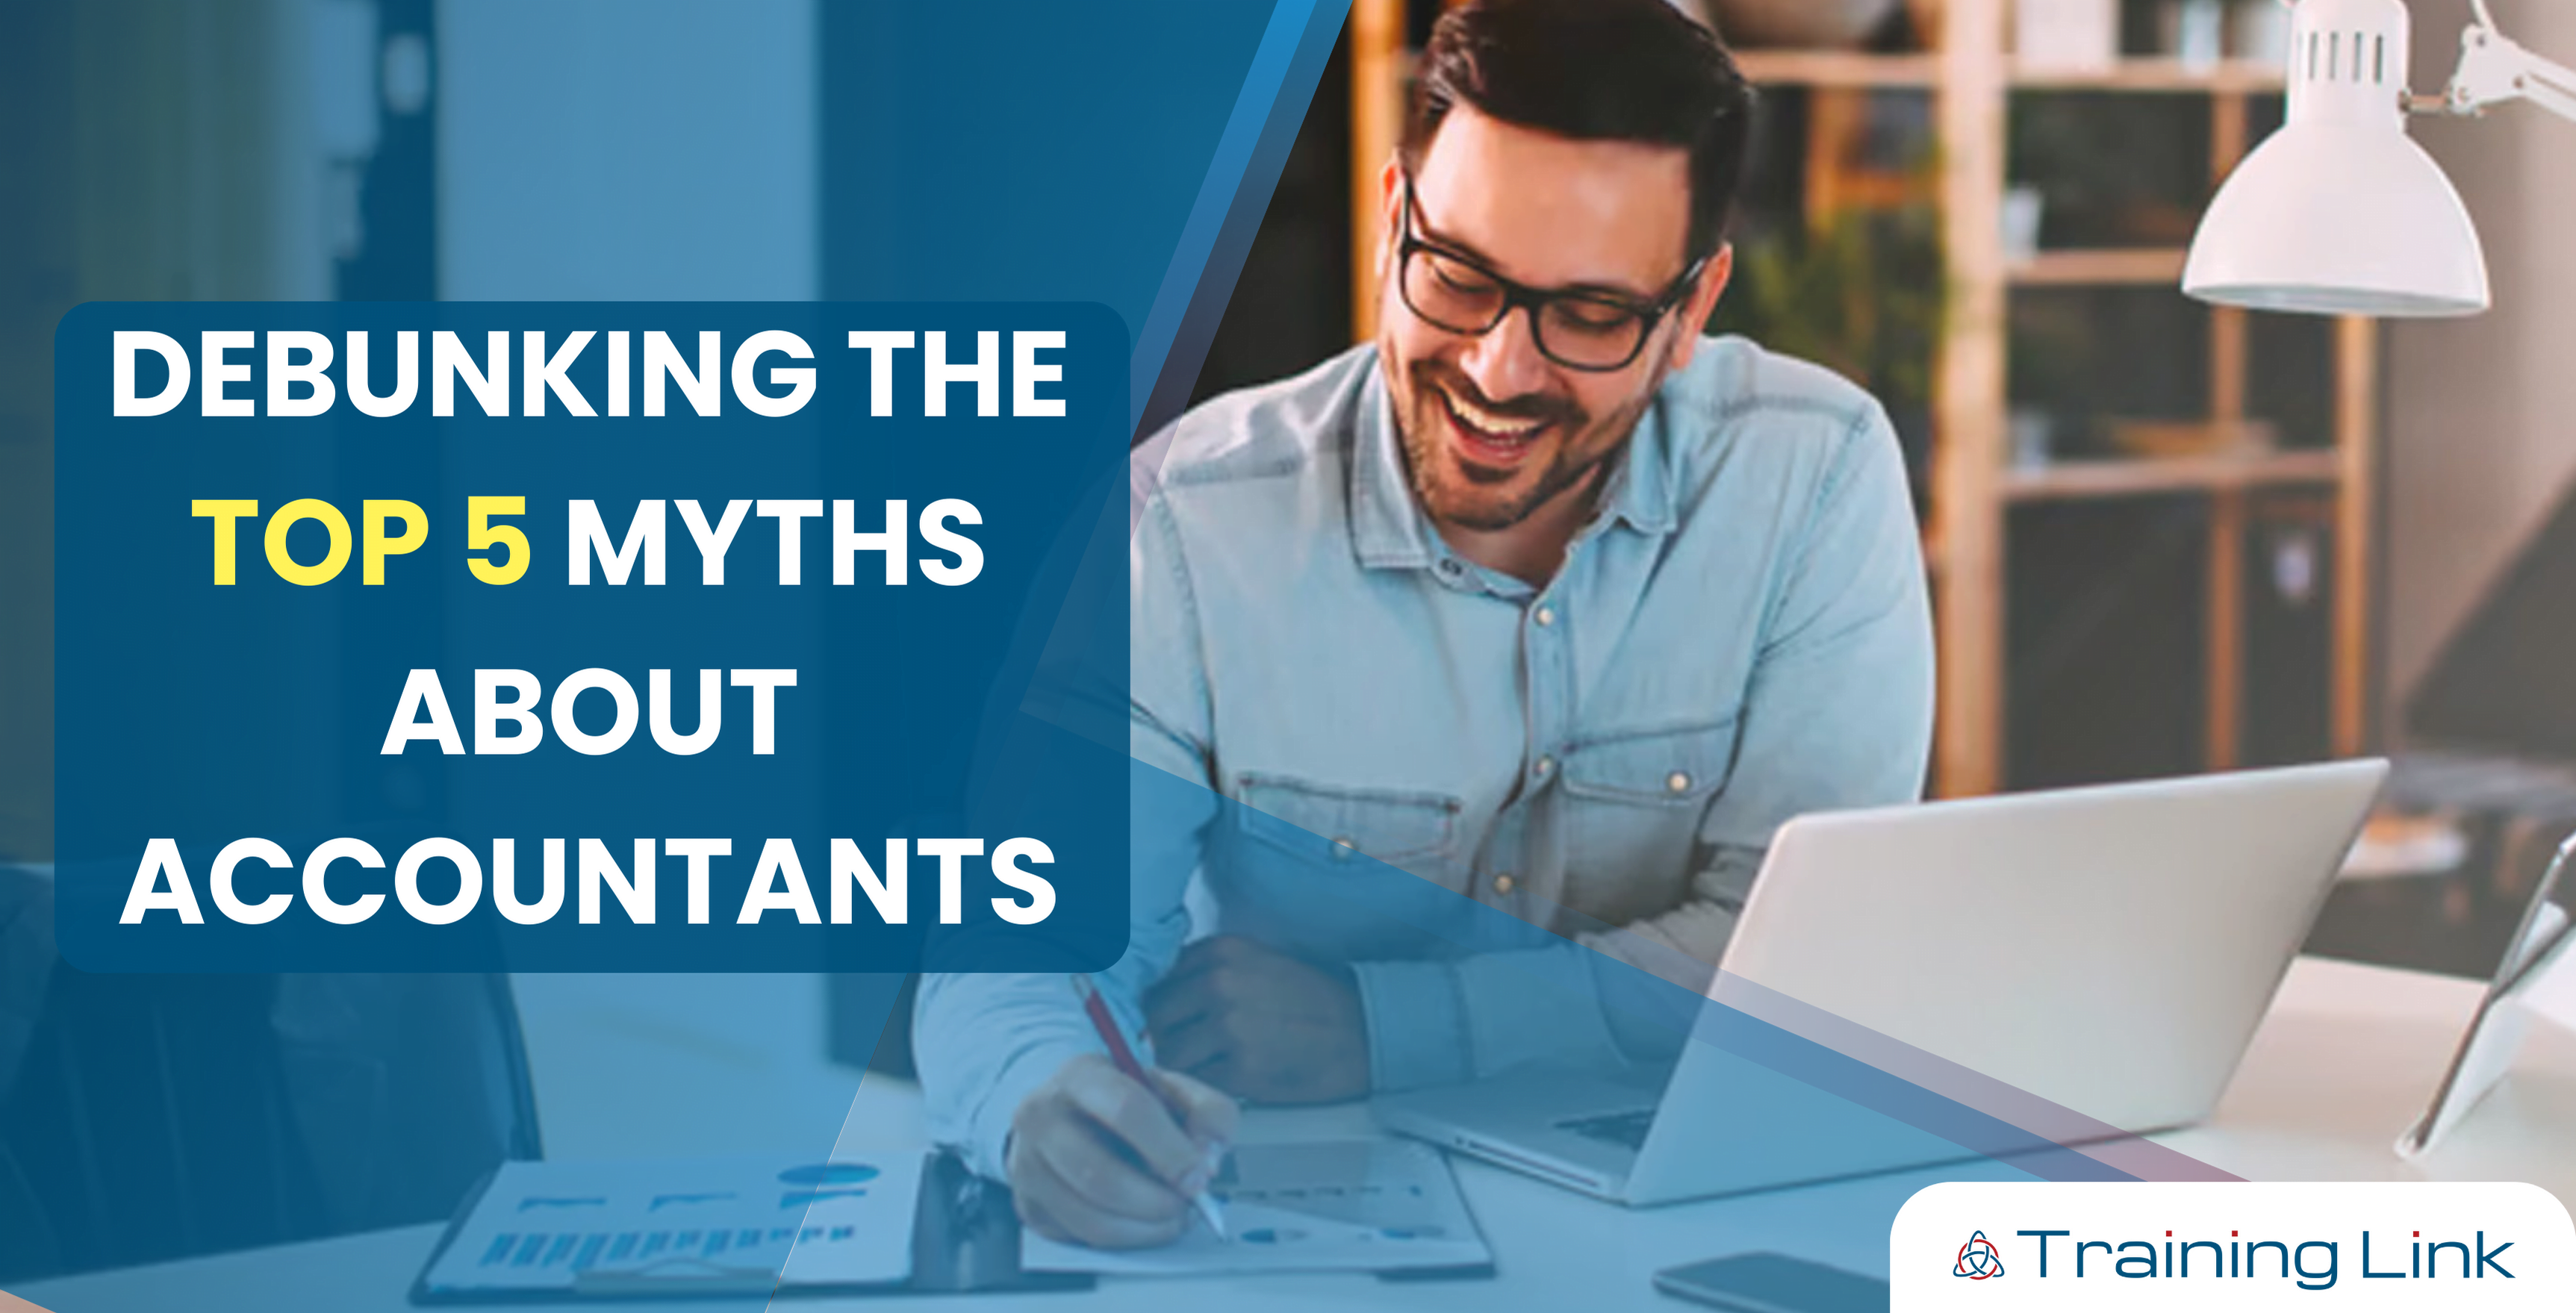 Debunking the Top 5 Myths about Accountants - Feautred Image 1509